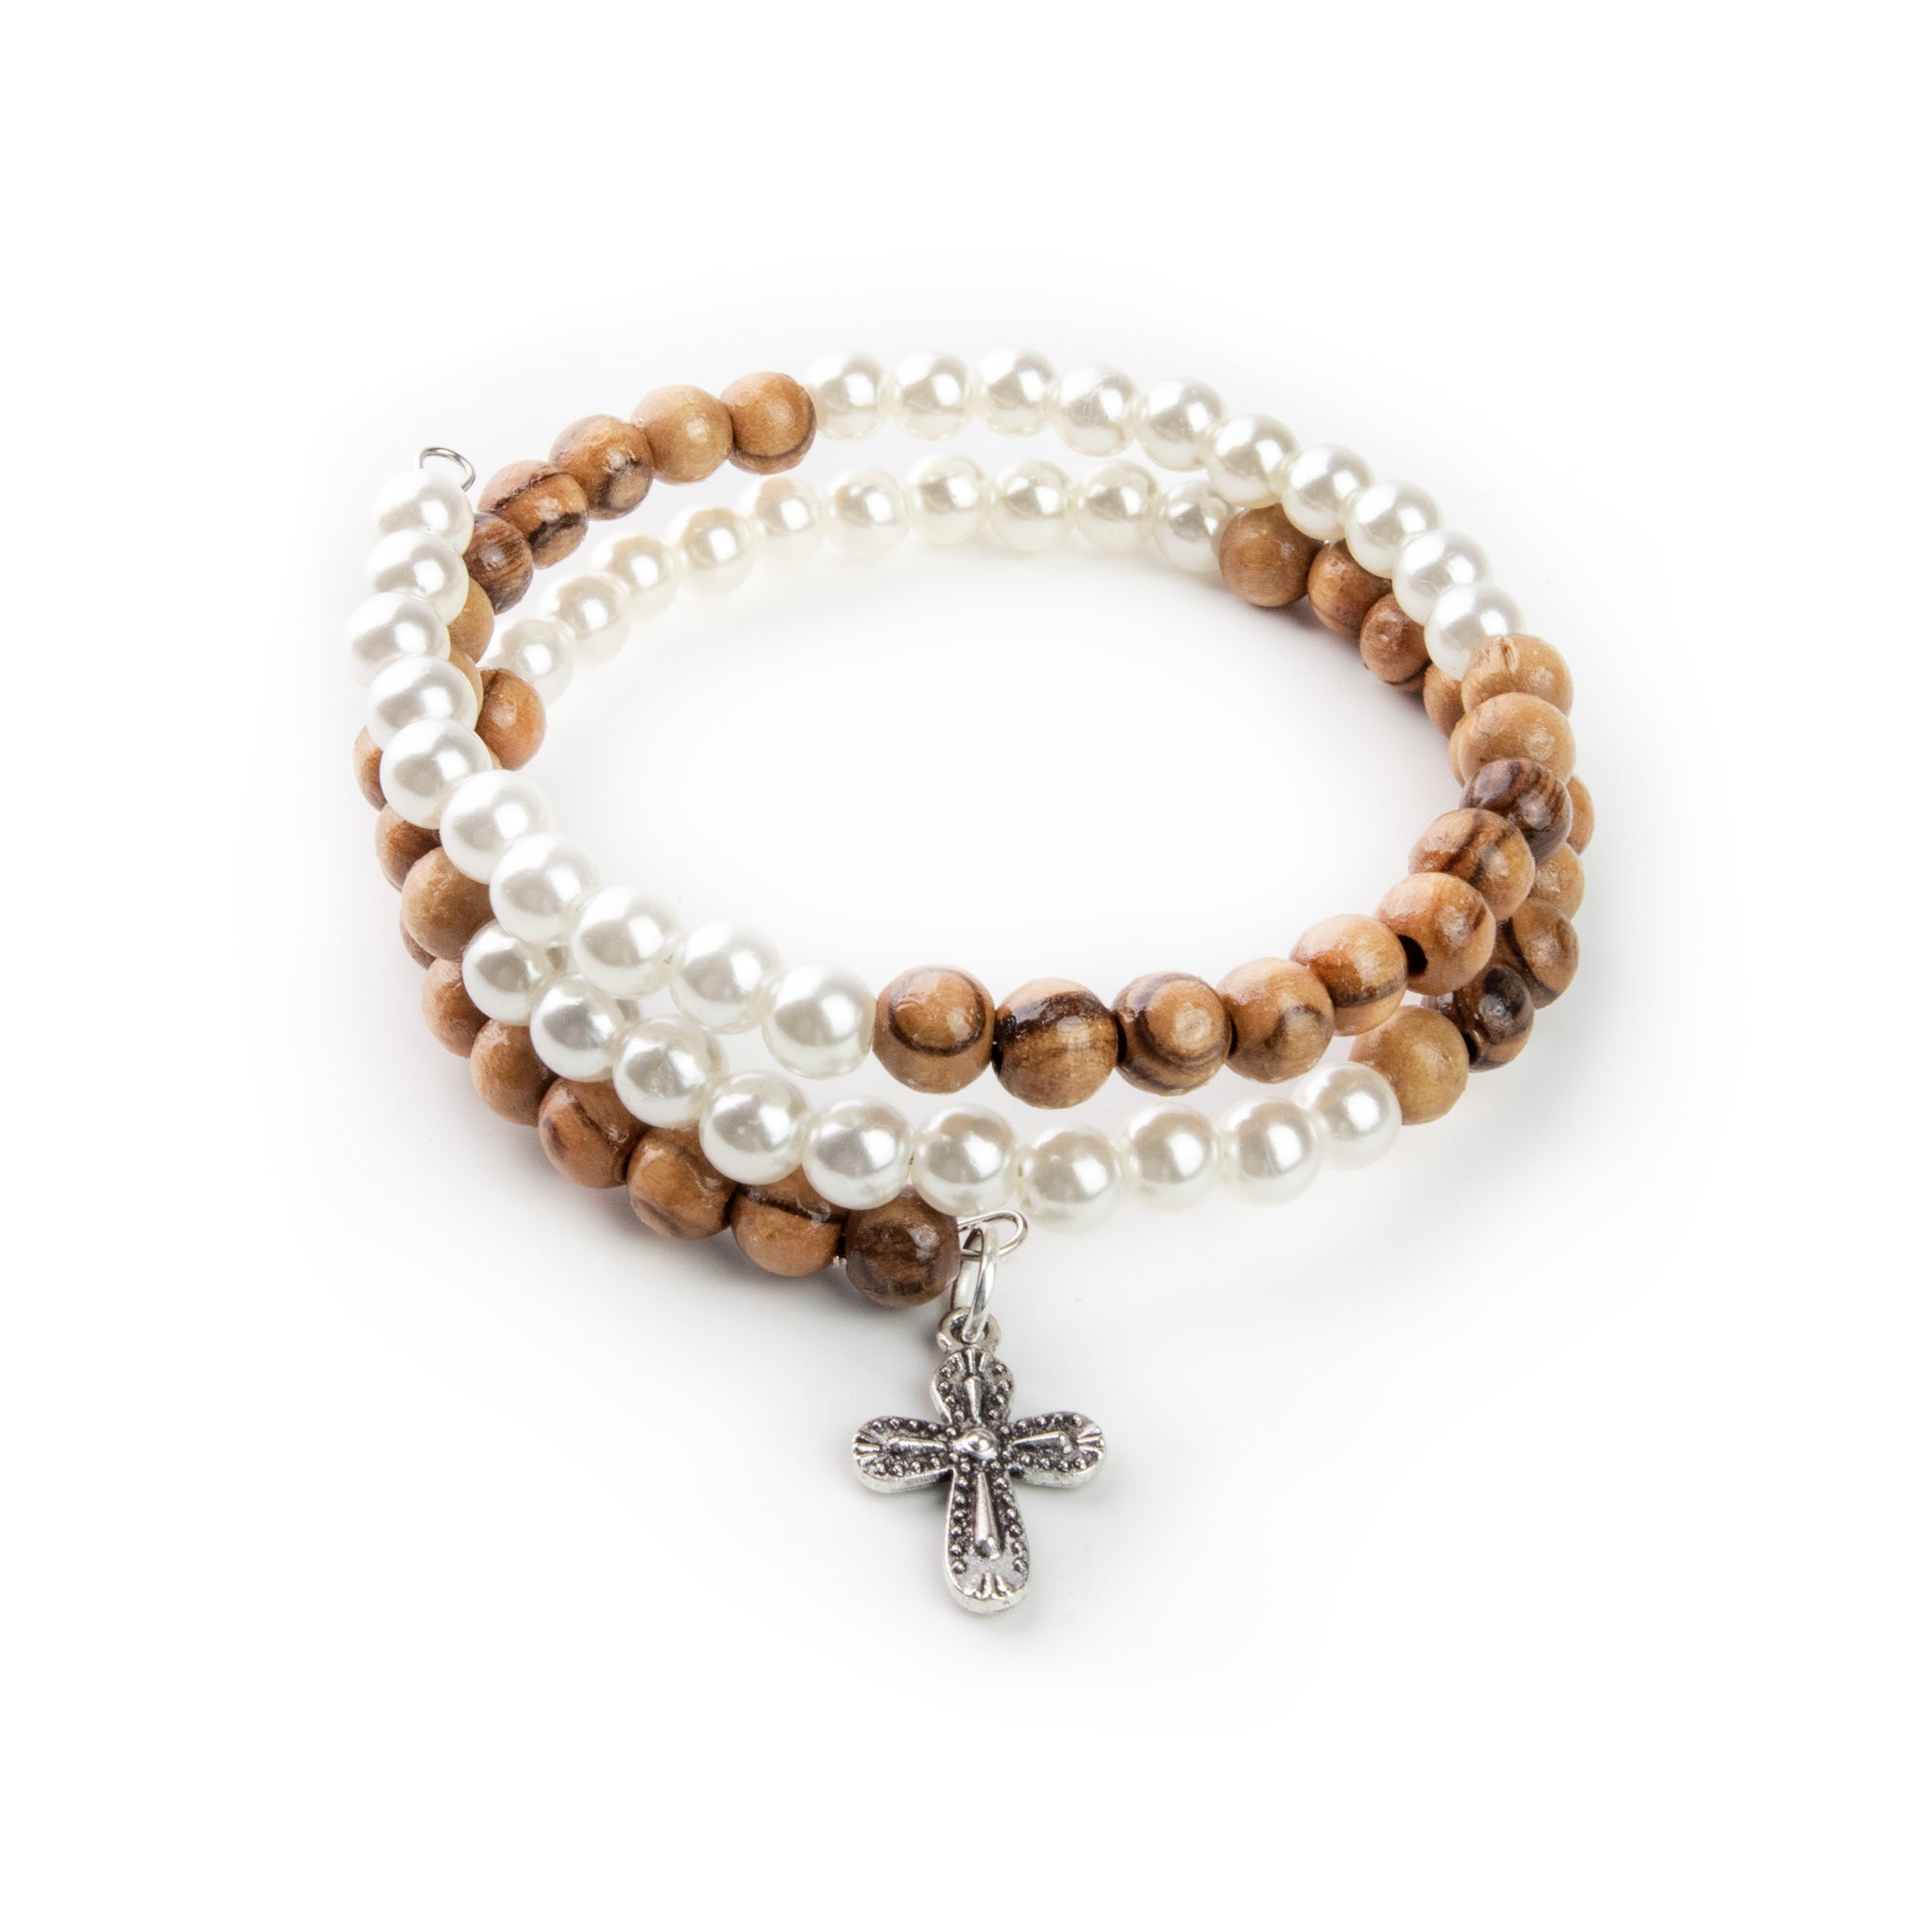 Helix Stretch Wrap Bracelet with Grouped Olive Wood and White Beads and Cross Dangle in Velvet Box